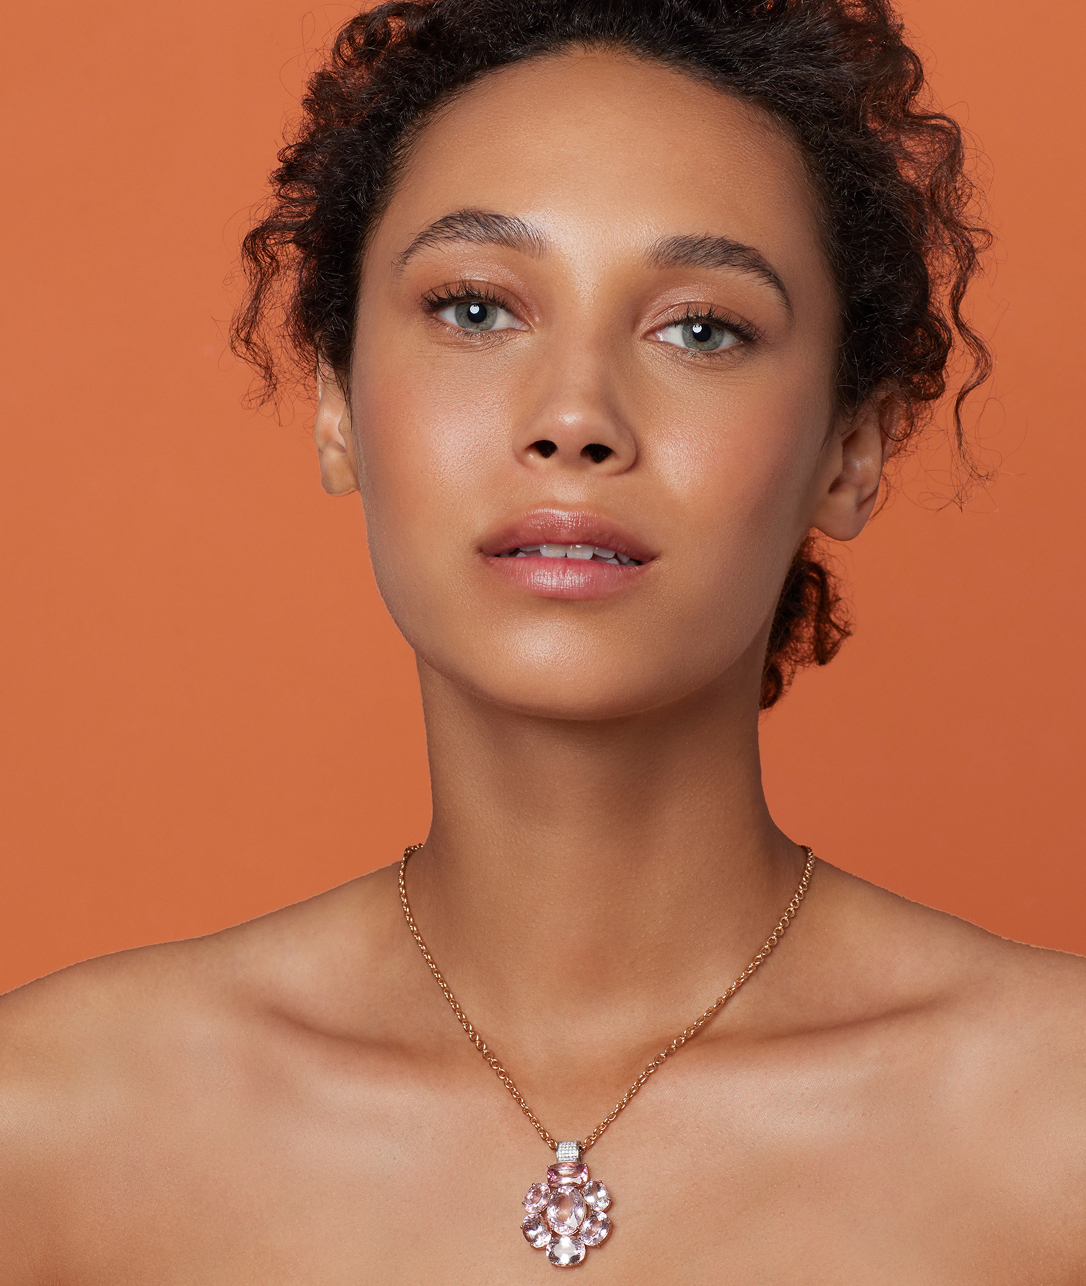 More diamonds? Yes, please. New Gemmy Gem Heavy Pavé Bale Pendant Necklaces are the jewelry equivalent of adding an exclamation point to style in all caps.SHOP PAVÉ BALE PENDANT NECKLACES